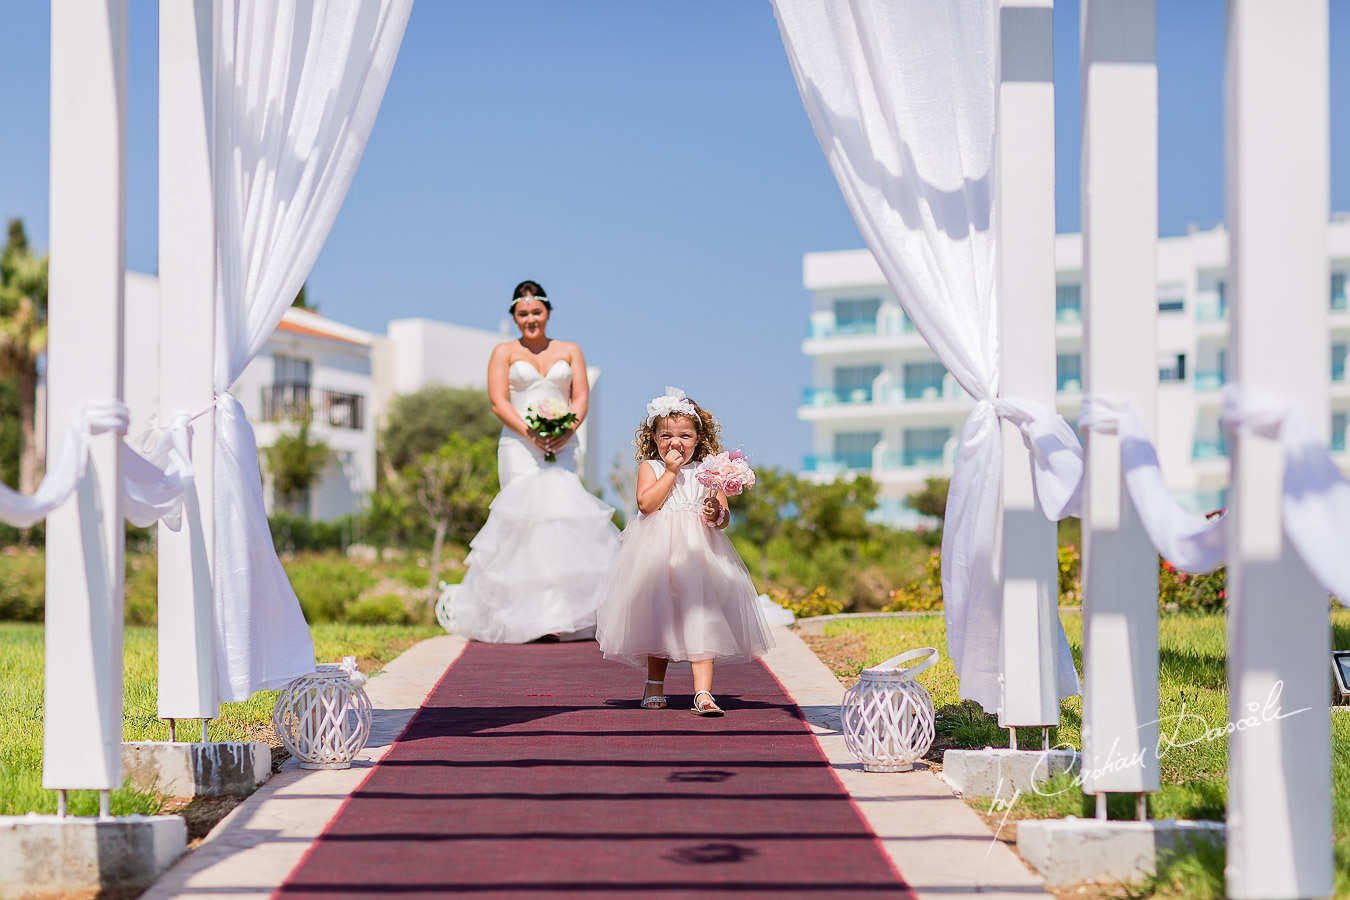 Eva, the flower girl and Amy, the bride, arriving at the wedding ceremony at King Elvelton Hotel and Resort in Paphos, Cyprus.